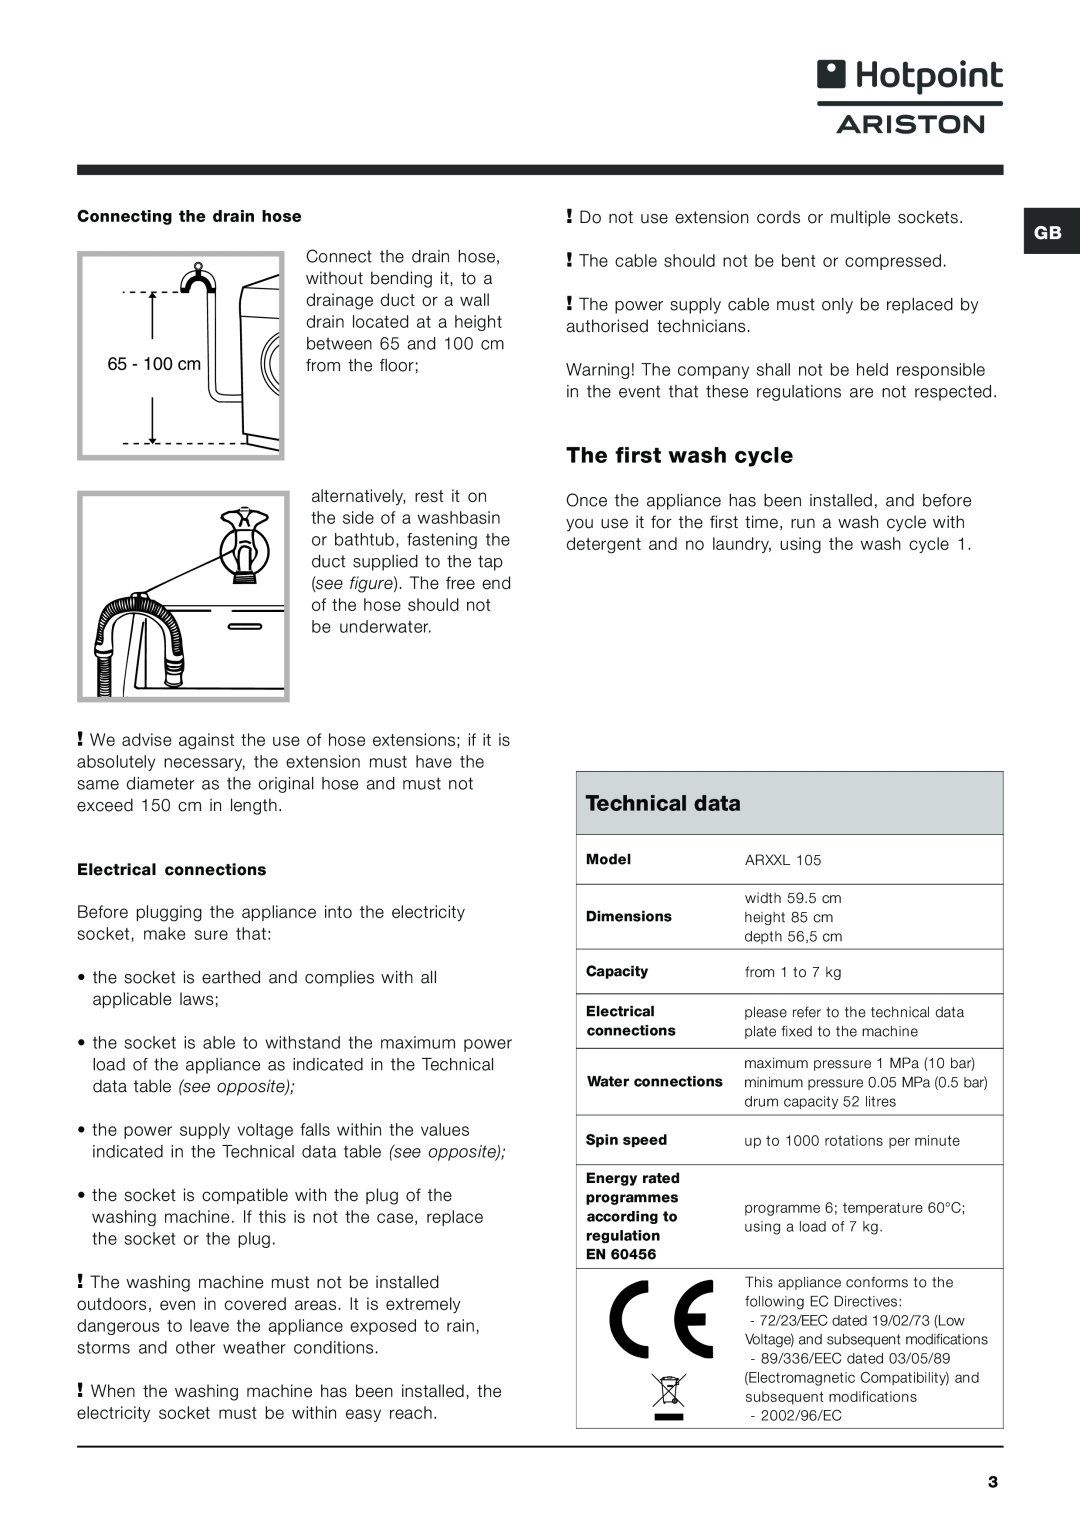 Hotpoint ARXXL105 manual The first wash cycle, Technical data 